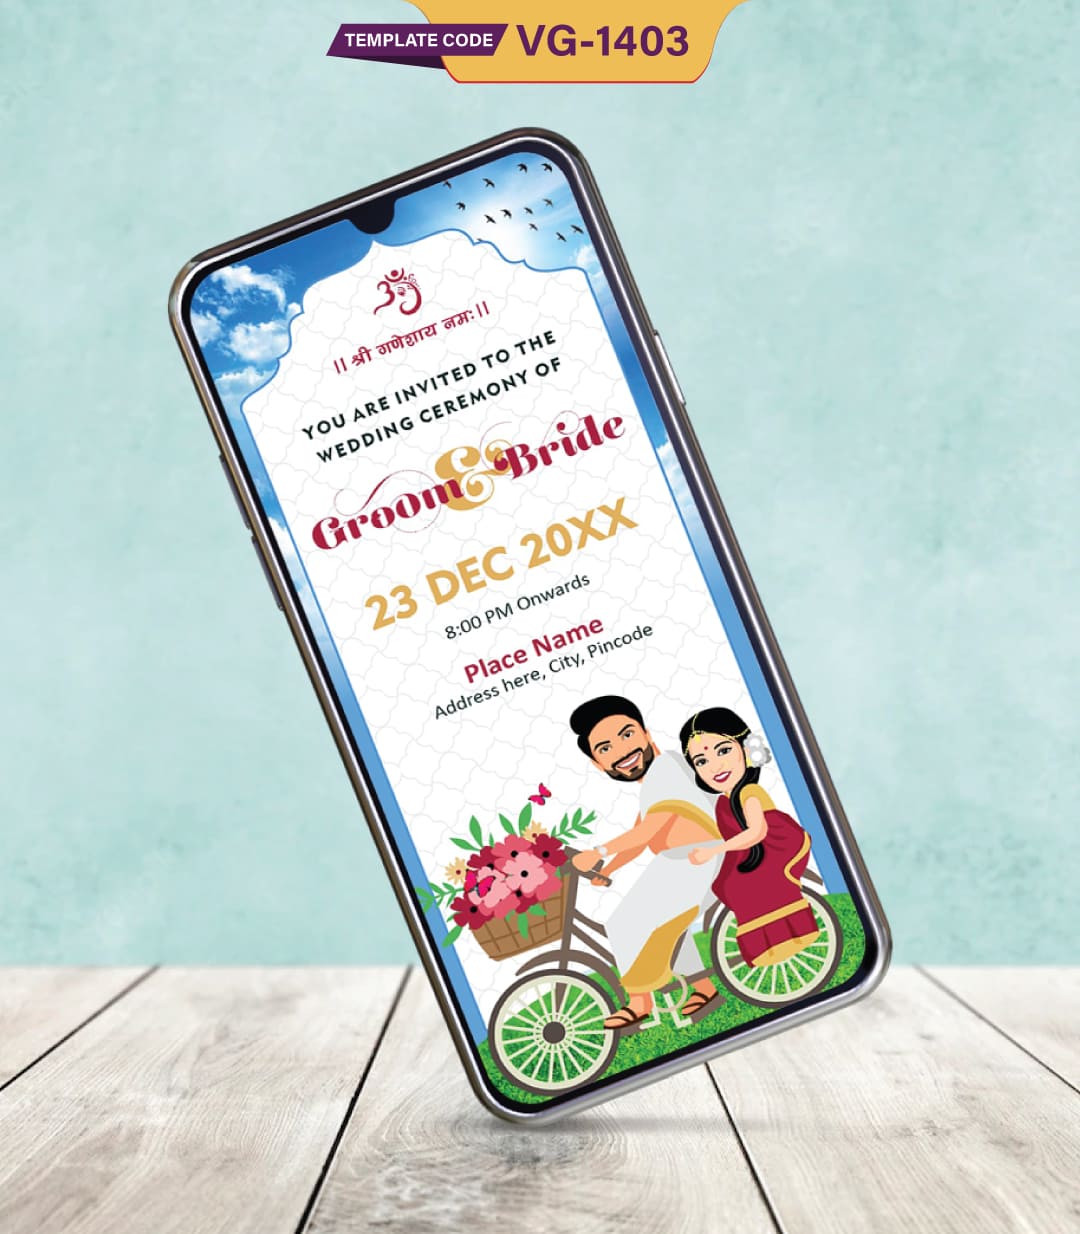 South Indian Caricature Wedding Invitation Card